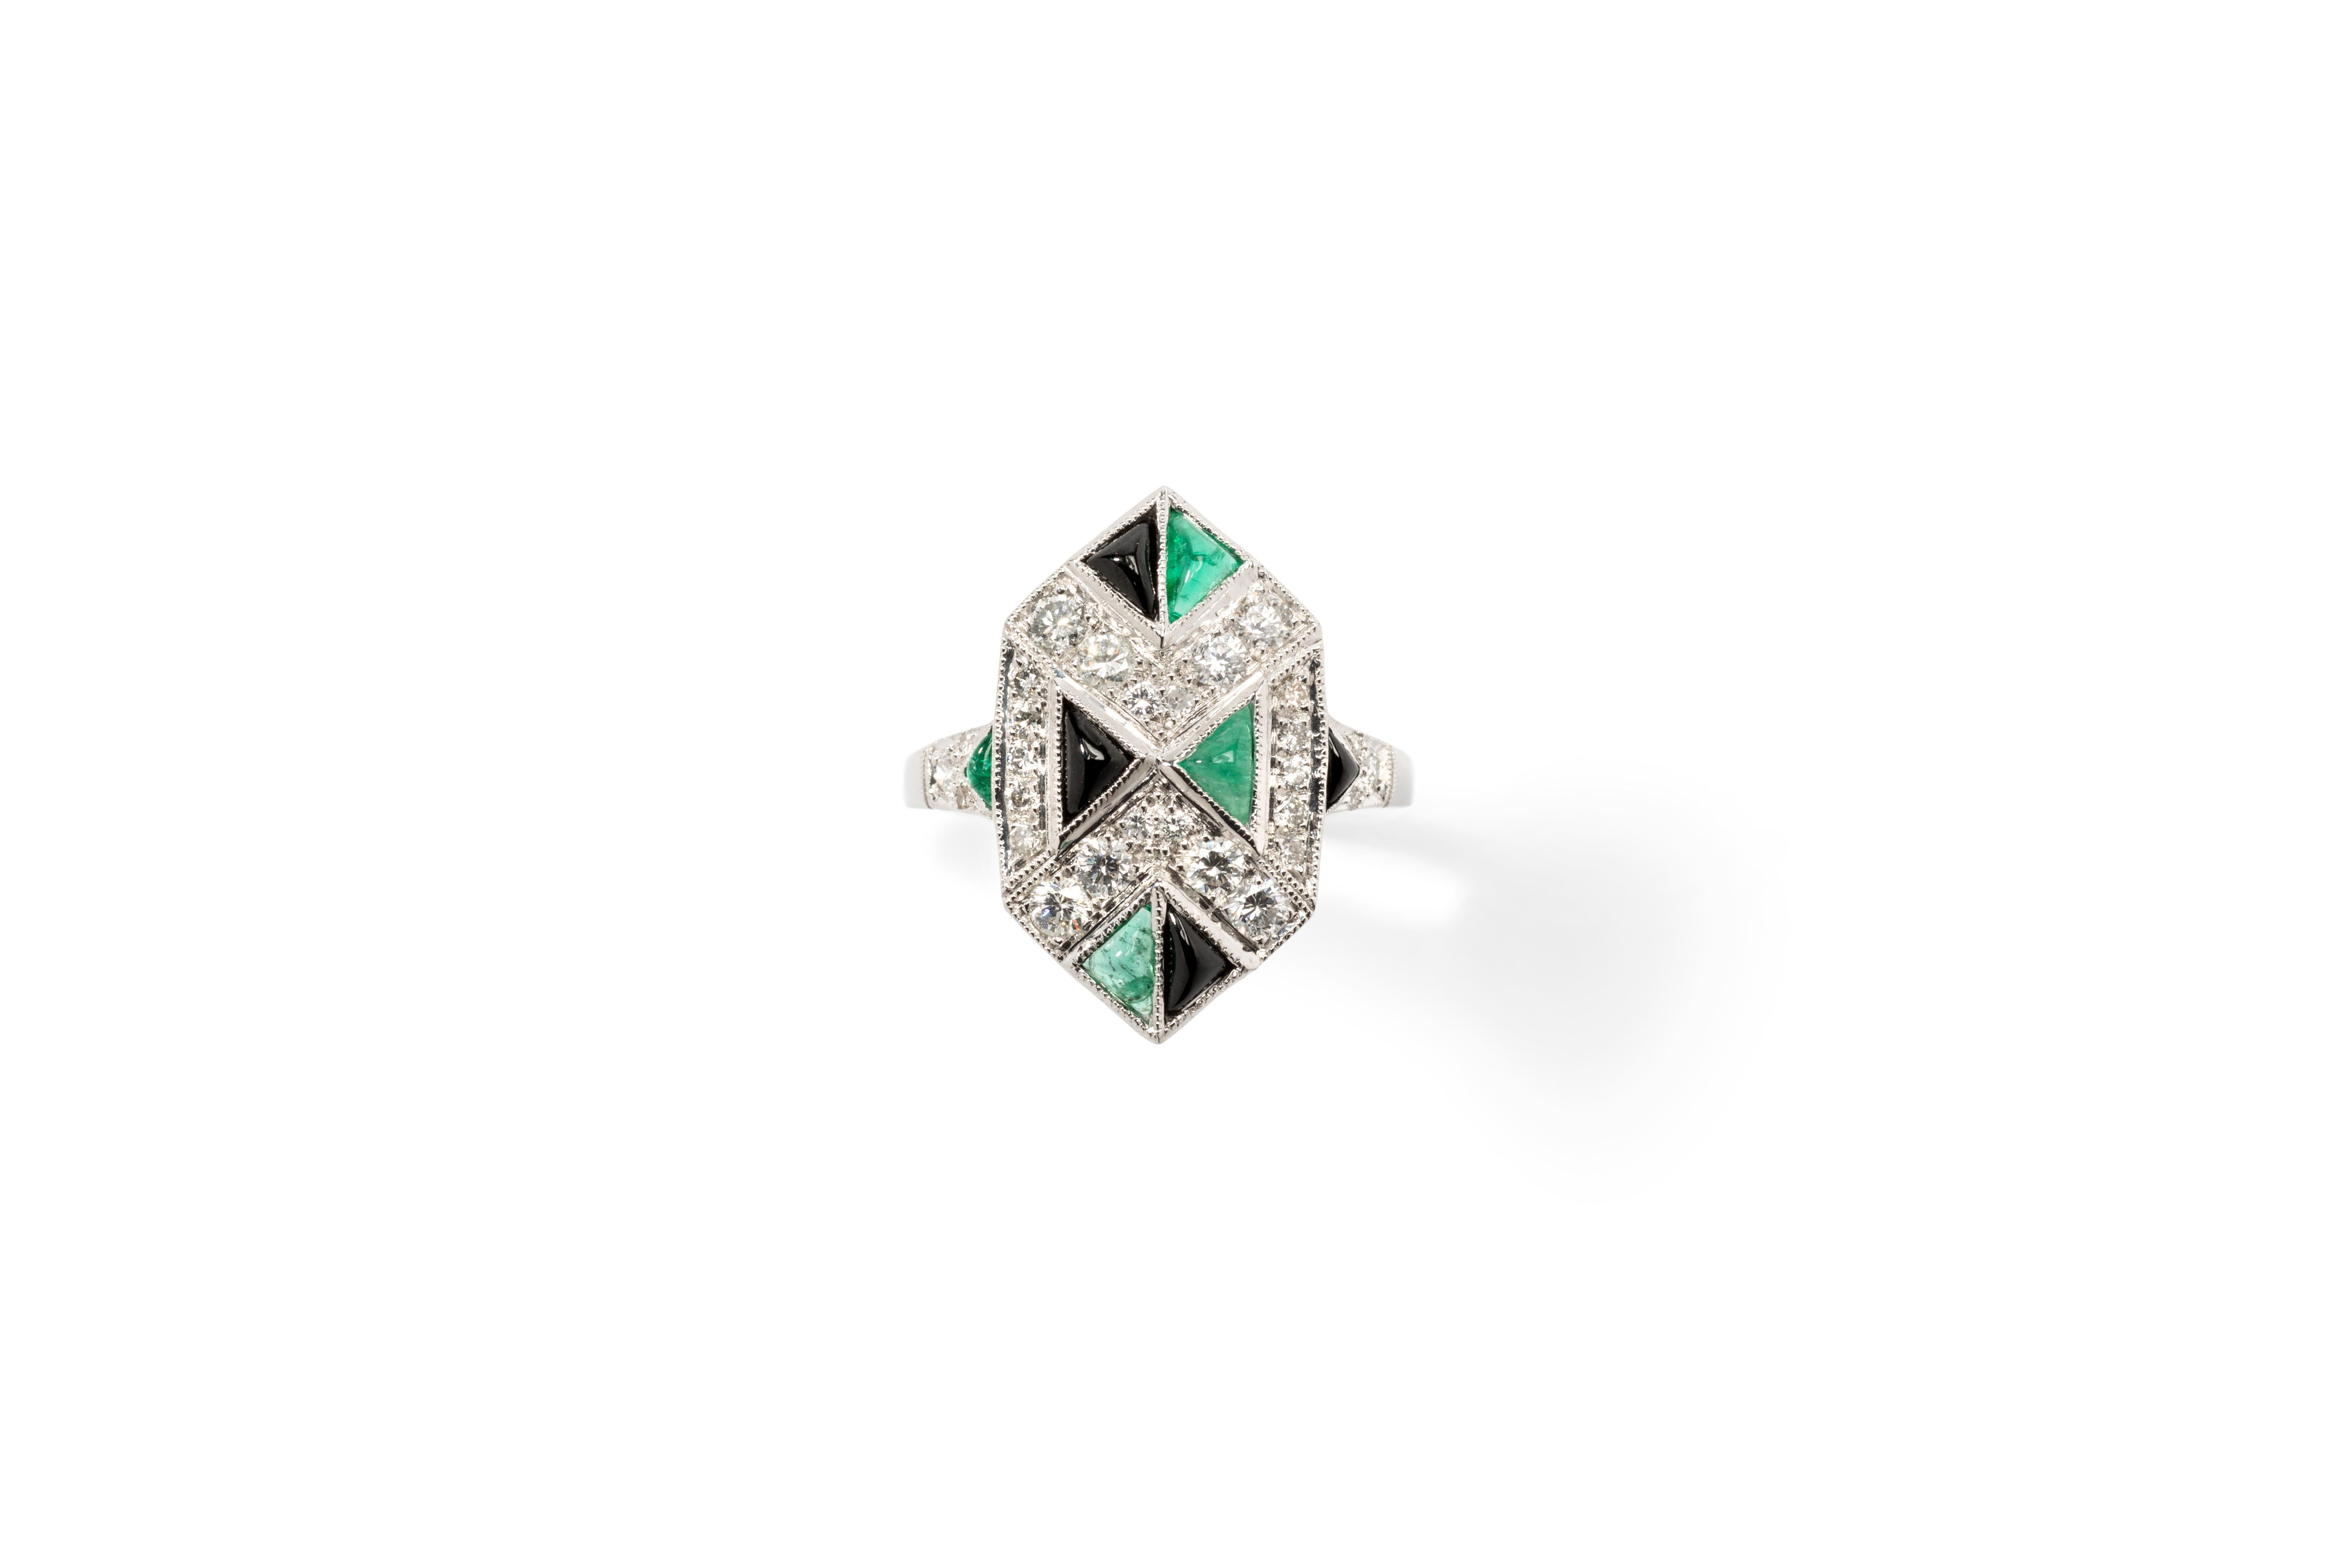 France, 2000s. Hexagonal front in geometric design. Set with 28 brilliant-cut diamonds weighing total 0.75 carat, 
color VS. Accompanied by 4 triangular emeralds and 4 triangular onyx. Mounted in 18 carat white gold. 
Marked with the purity 18K.